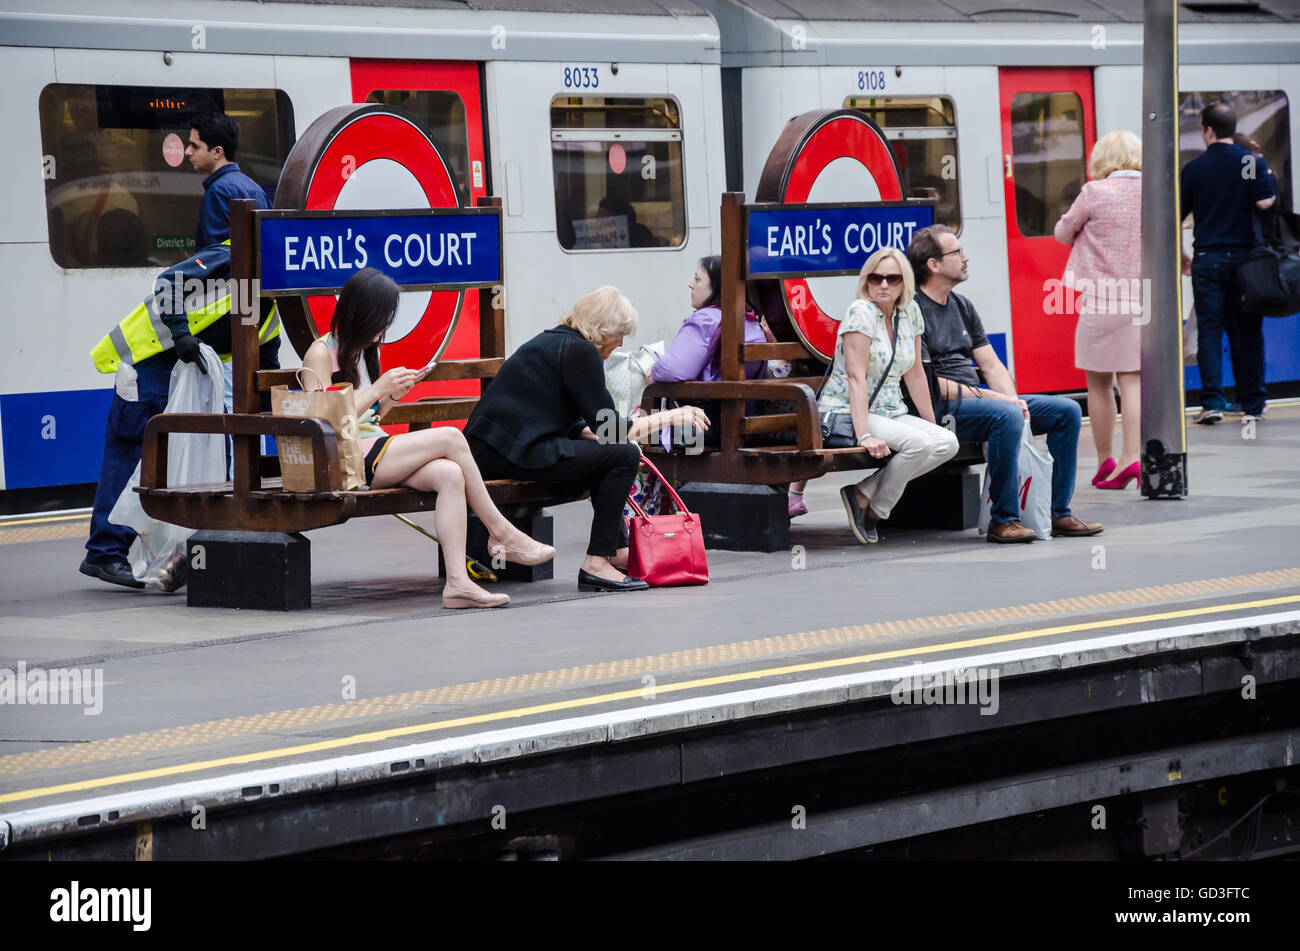 Passengers sit on benches at Earl's Court London Underground Station while waiting for their train. Stock Photo